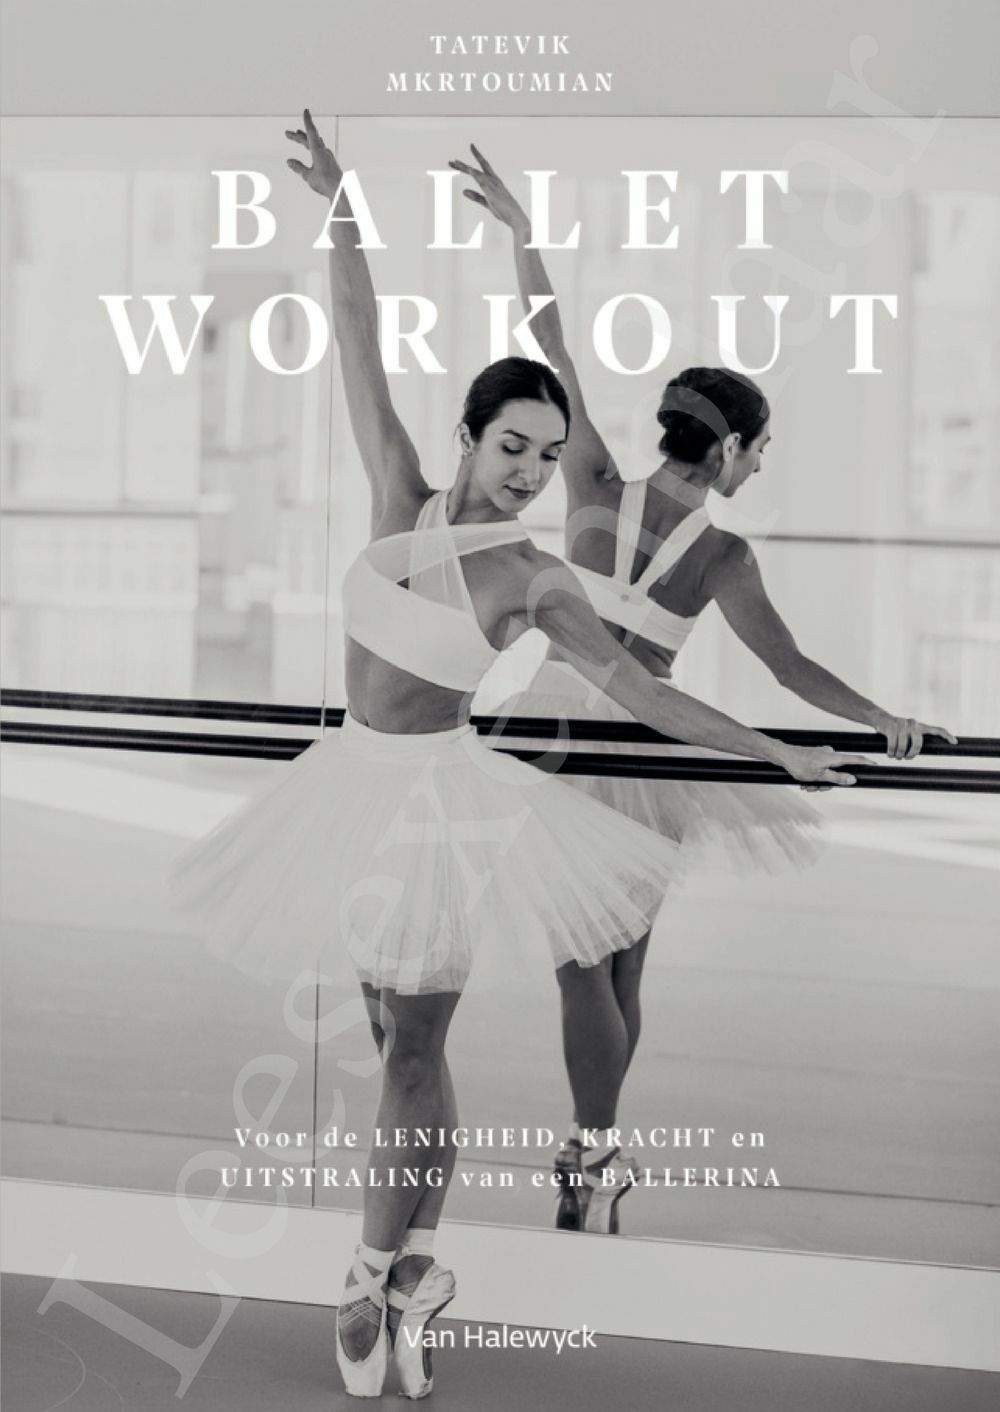 Preview: Ballet workout